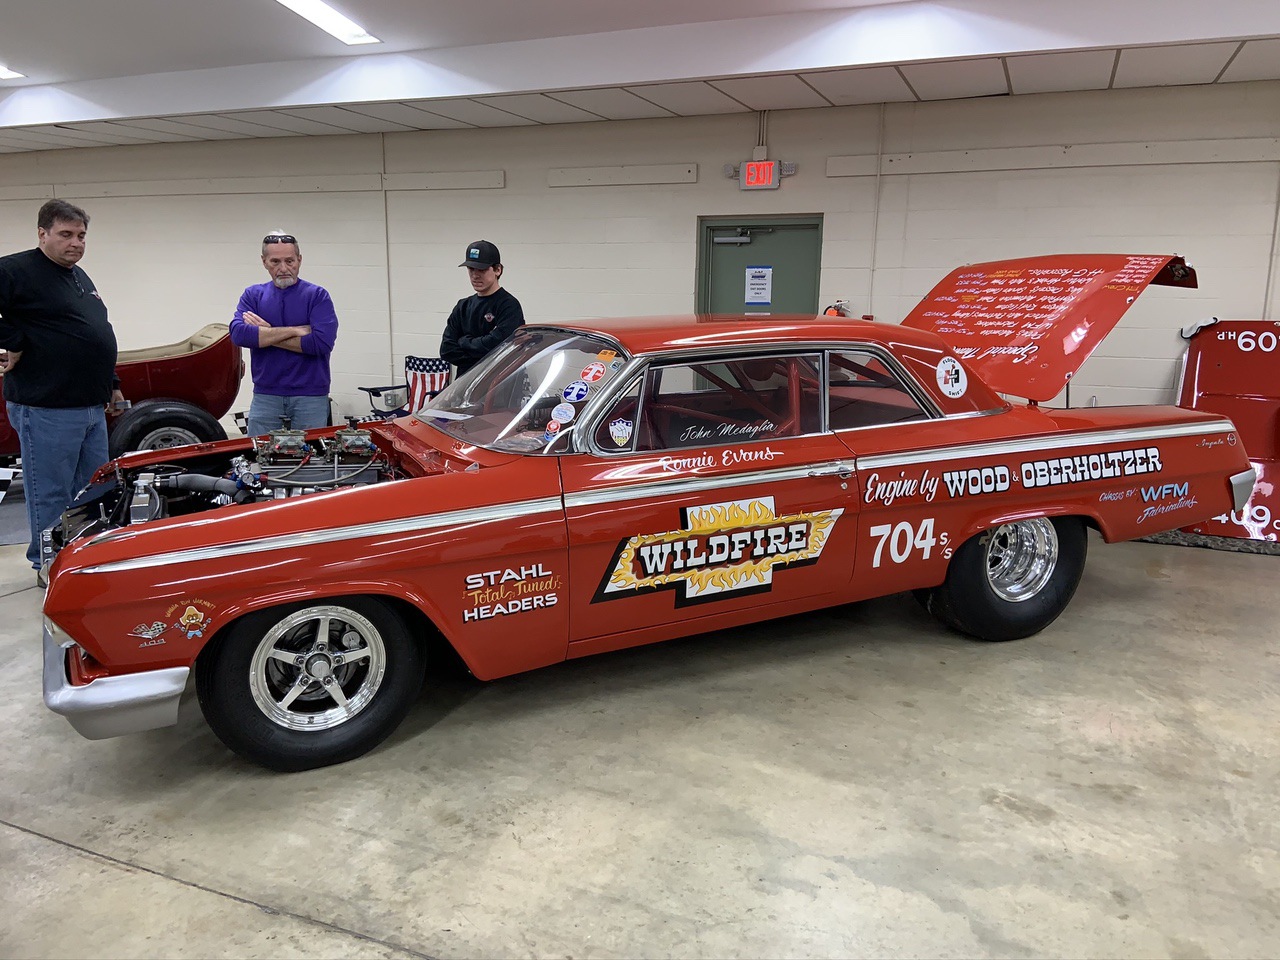 2020 Lebanon DragFest Gallery: Cold Outside? Drag Racing Machines Will Warm Your Heart!